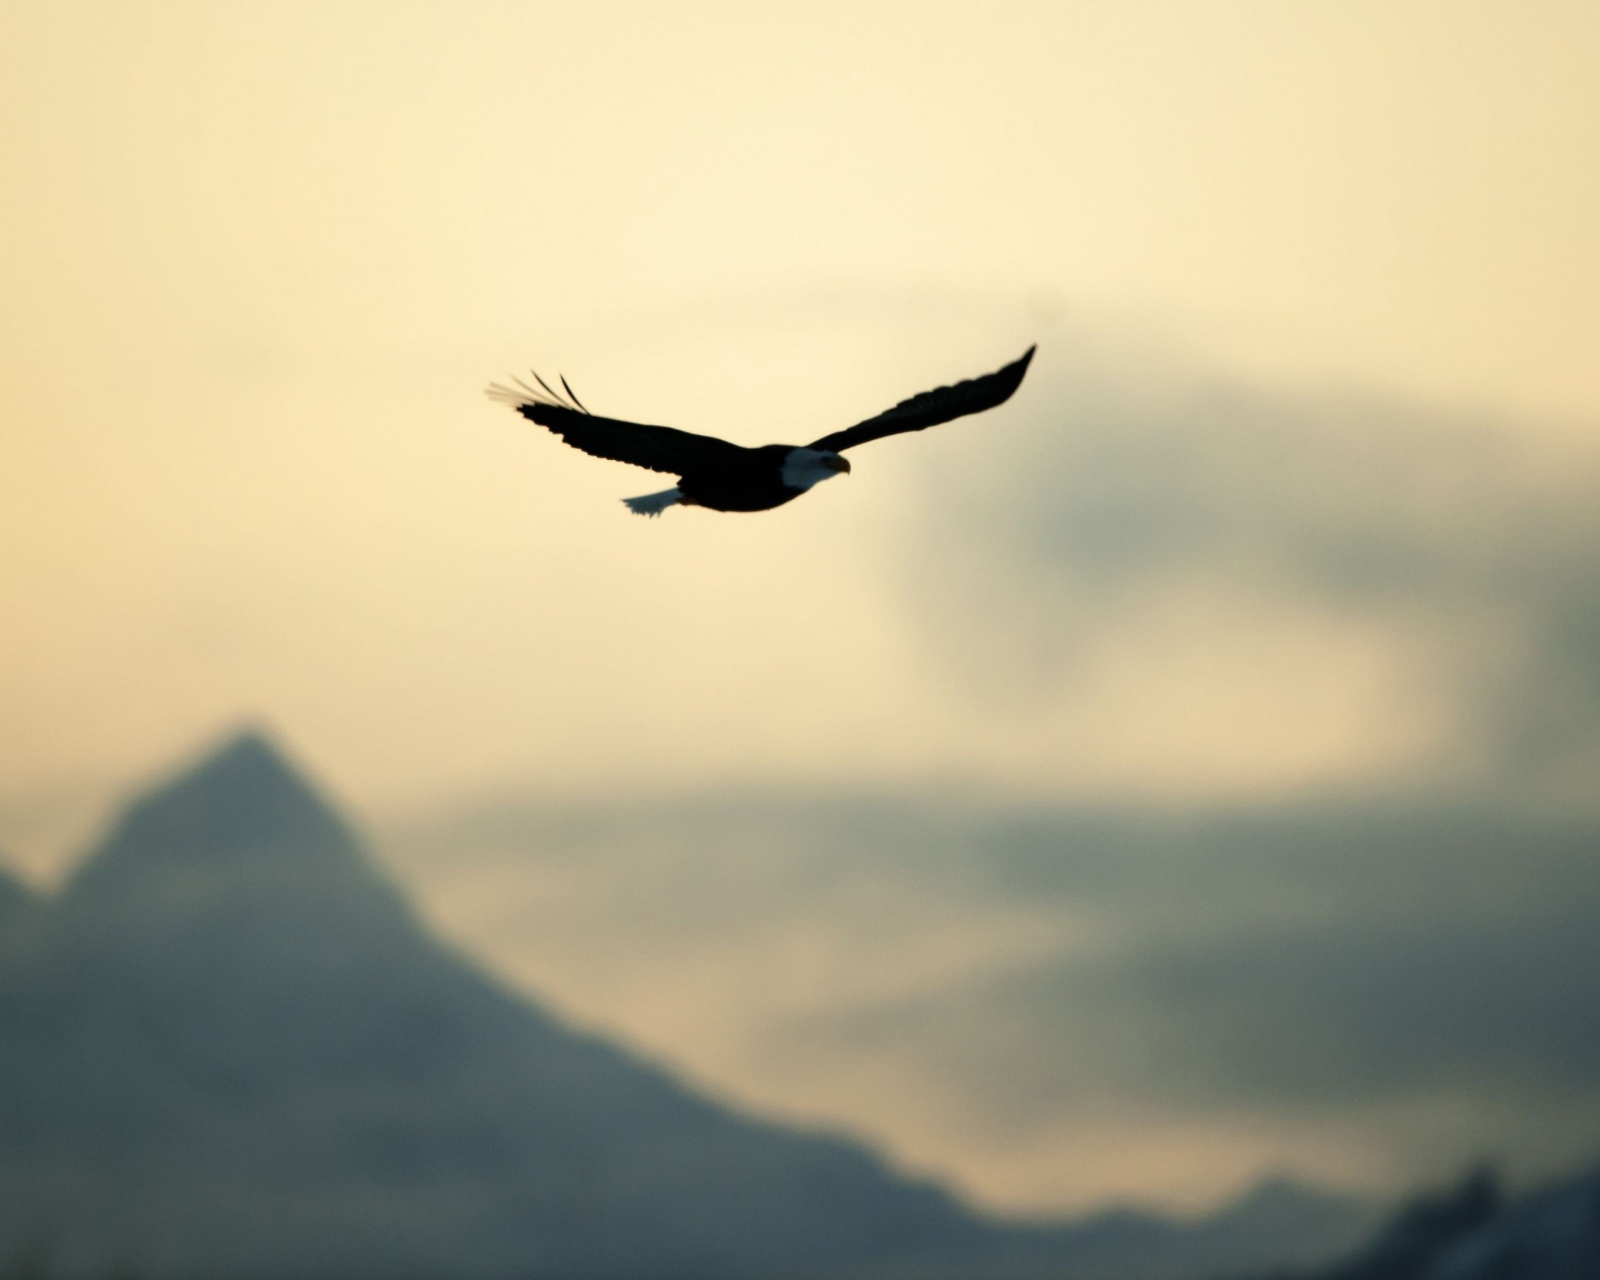 Eagle In The Sky wallpaper 1600x1280